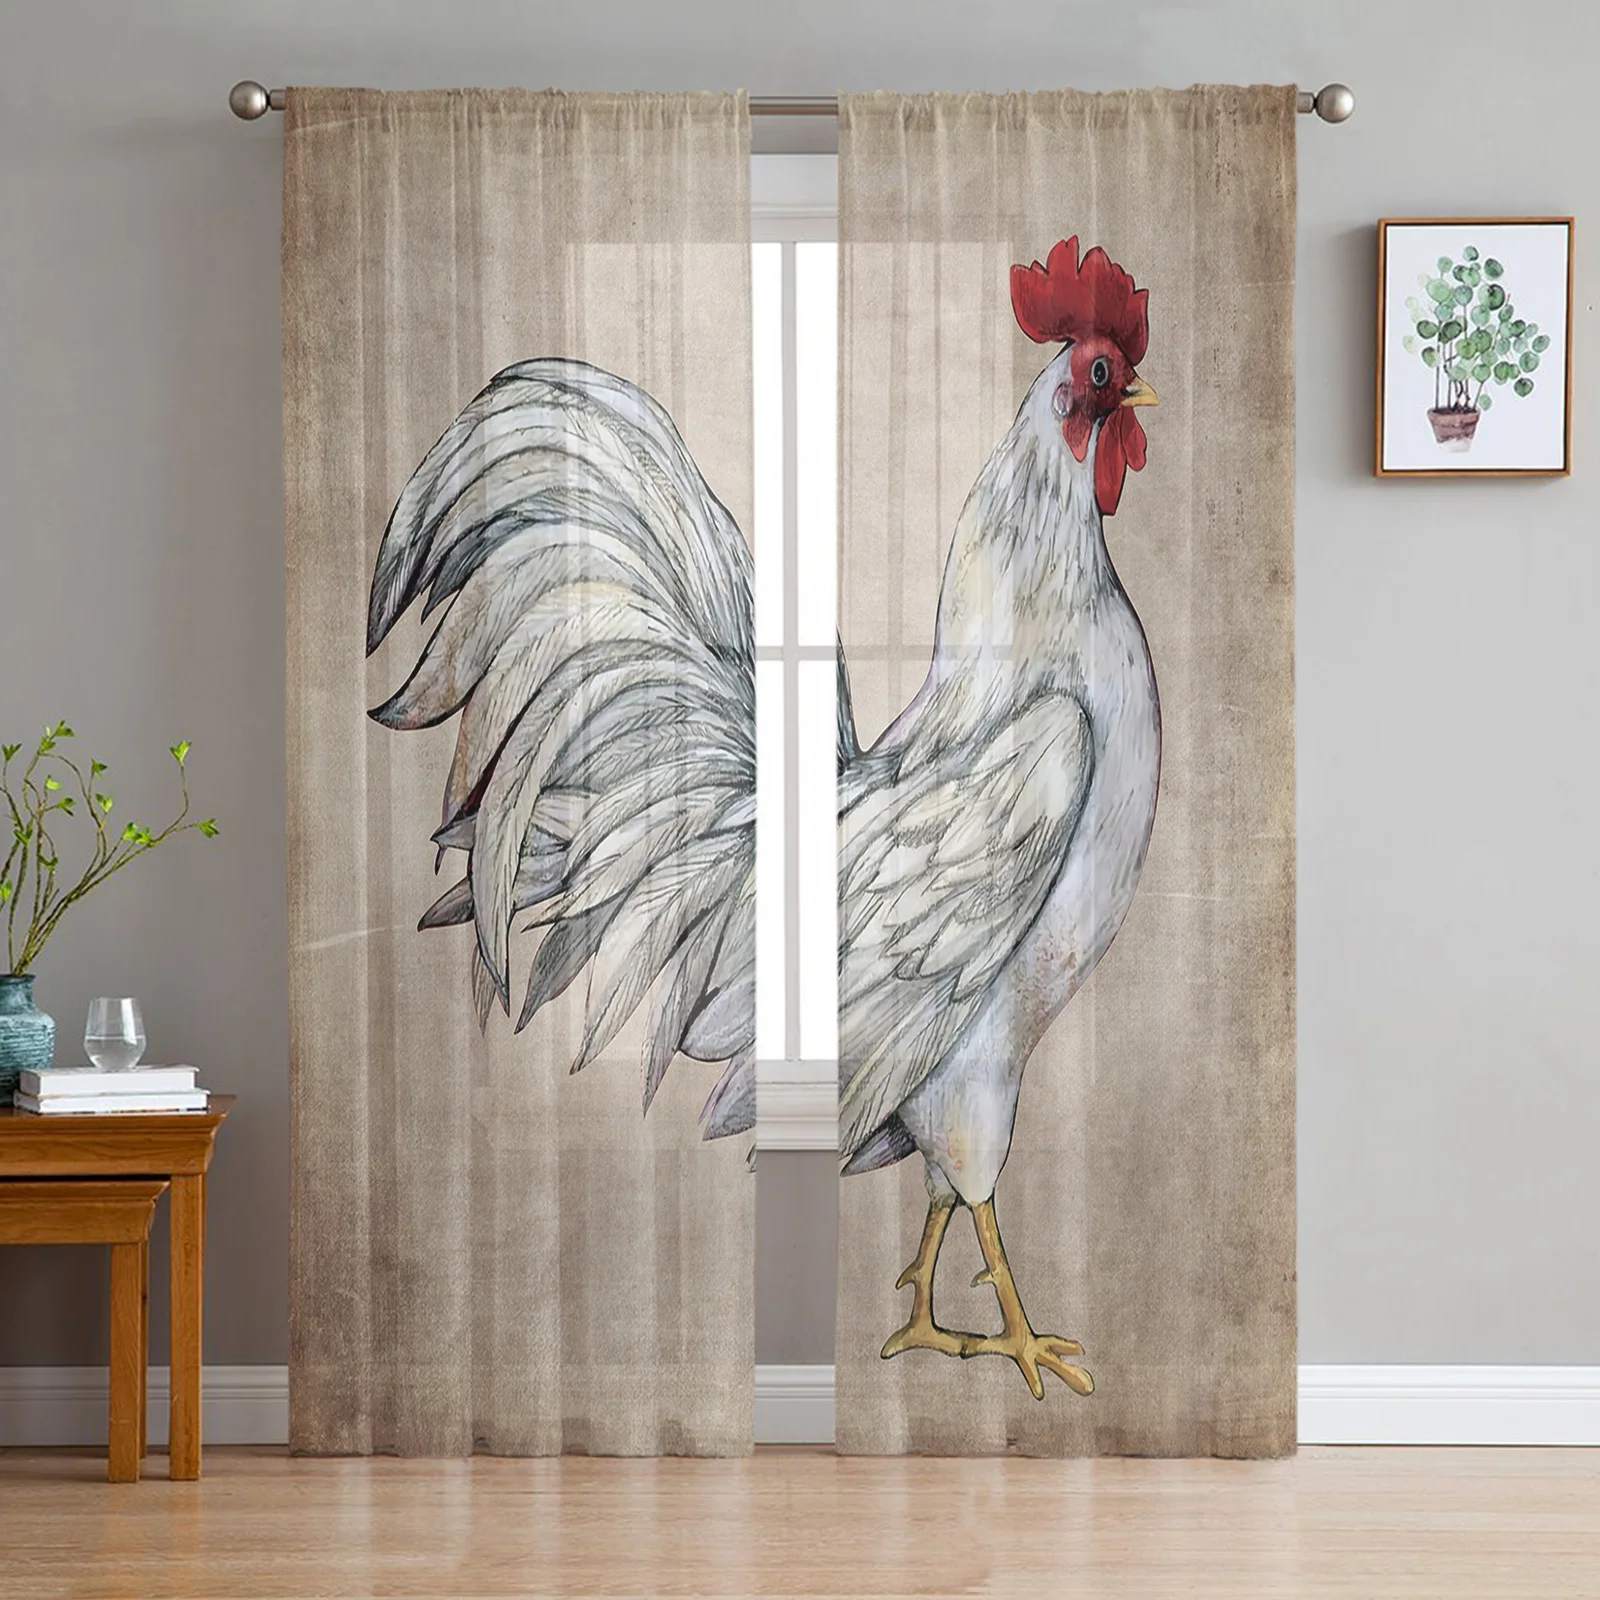 

Farm Animal Rooster Tulle Curtains For Living Room Bedroom Kitchen Decoration Chiffon Window Treatments Voile Sheer Curtain